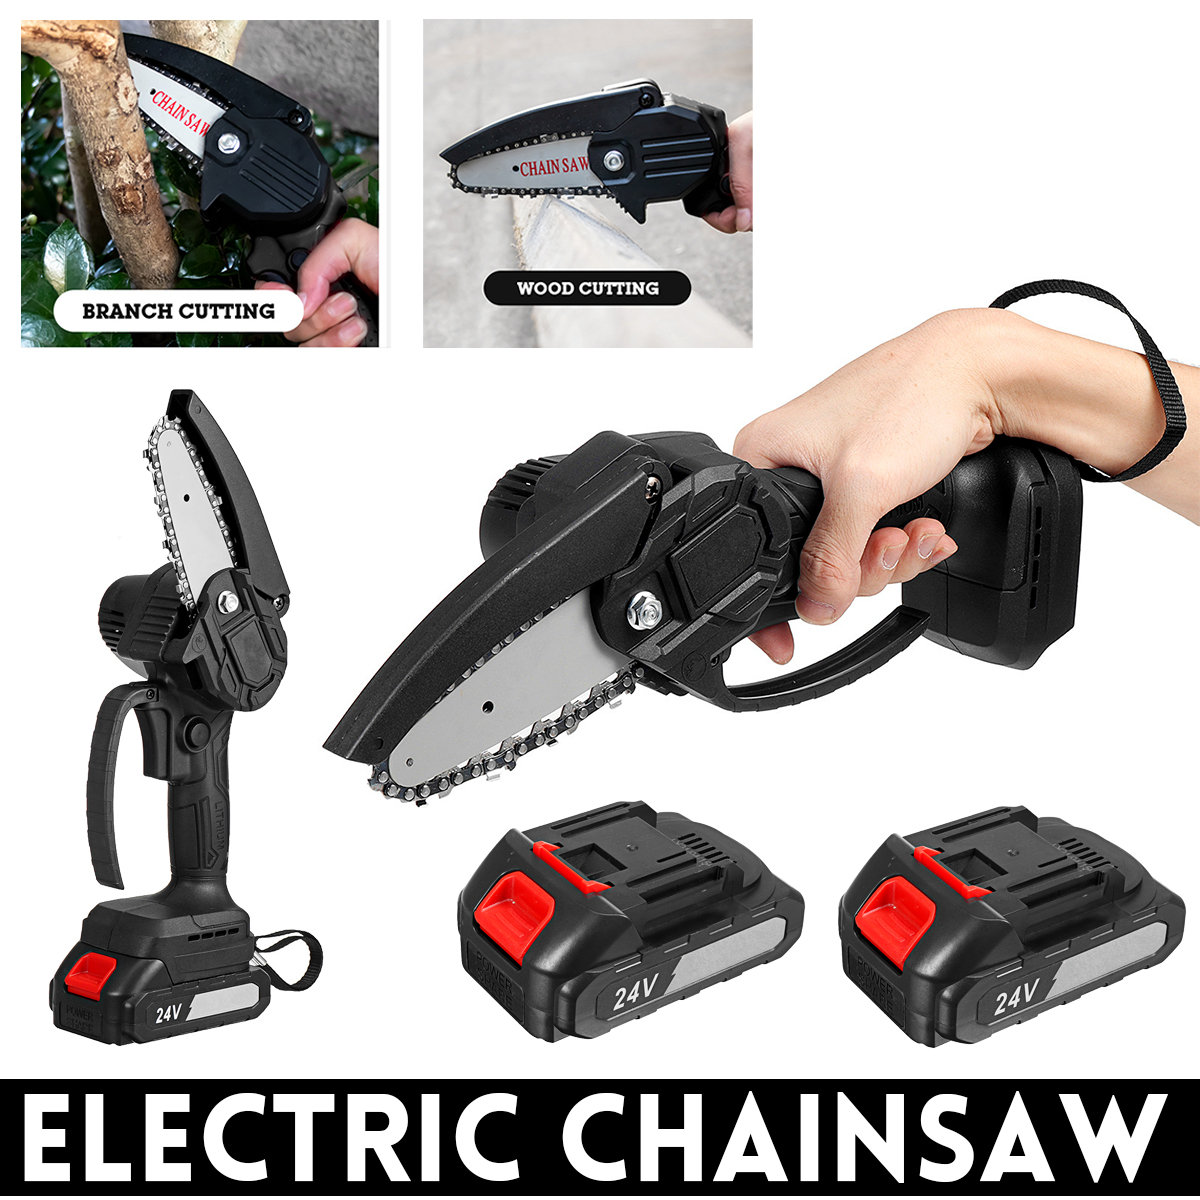 4inch-24V-Rechargeable-Brushless-Electric-Chain-Saw-Woodworking-Tool-Wood-Cutter-ChainSaws-W-12pcs-B-1858870-2